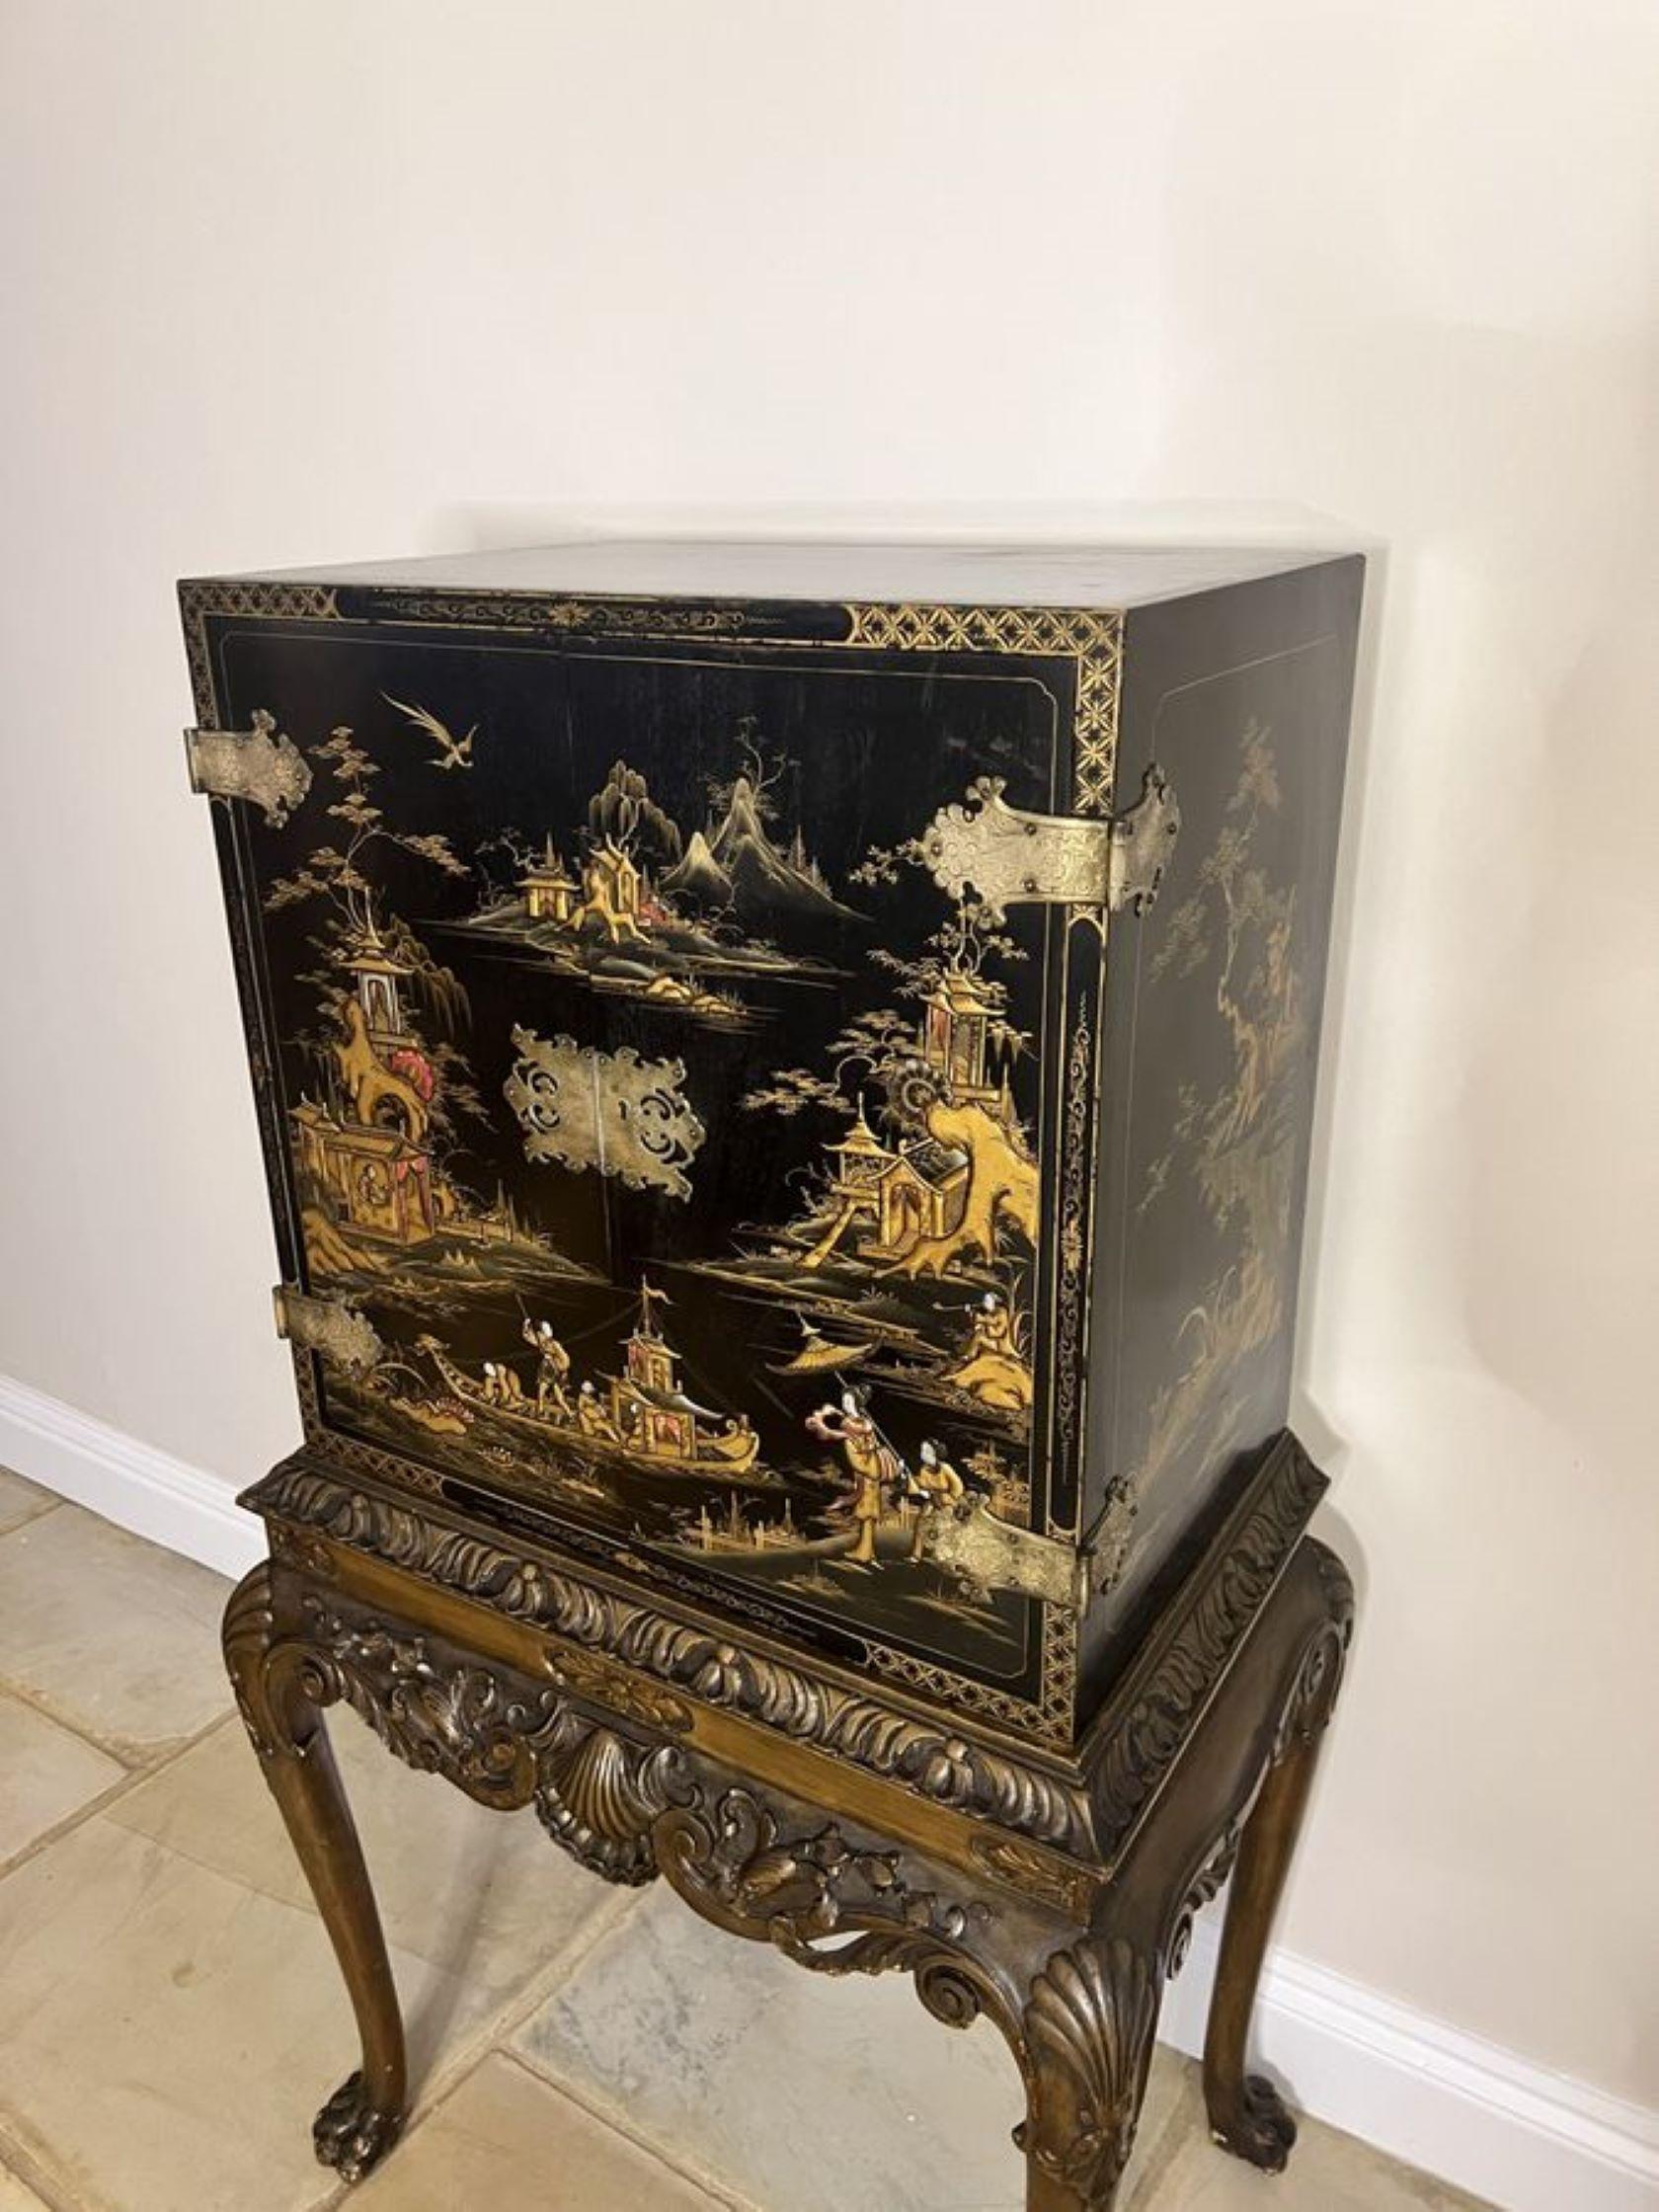 Outstanding quality antique Edwardian chinoiserie decorated cabinet on a stand 3